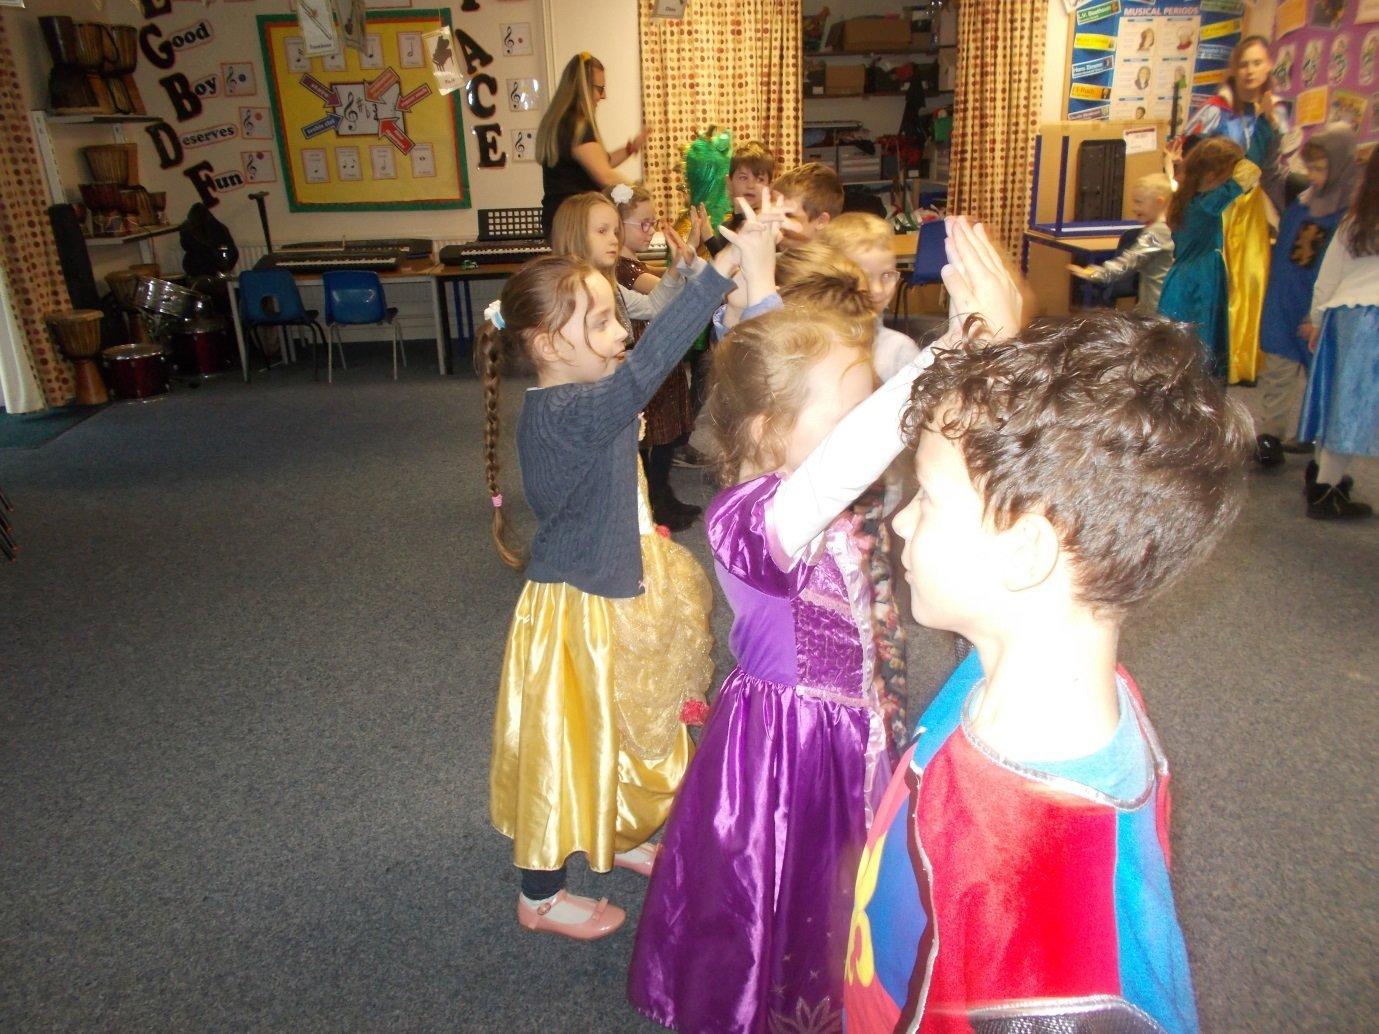 Children at Upper Beeding Primary School dancing during the medieval party SUS-200129-145514001